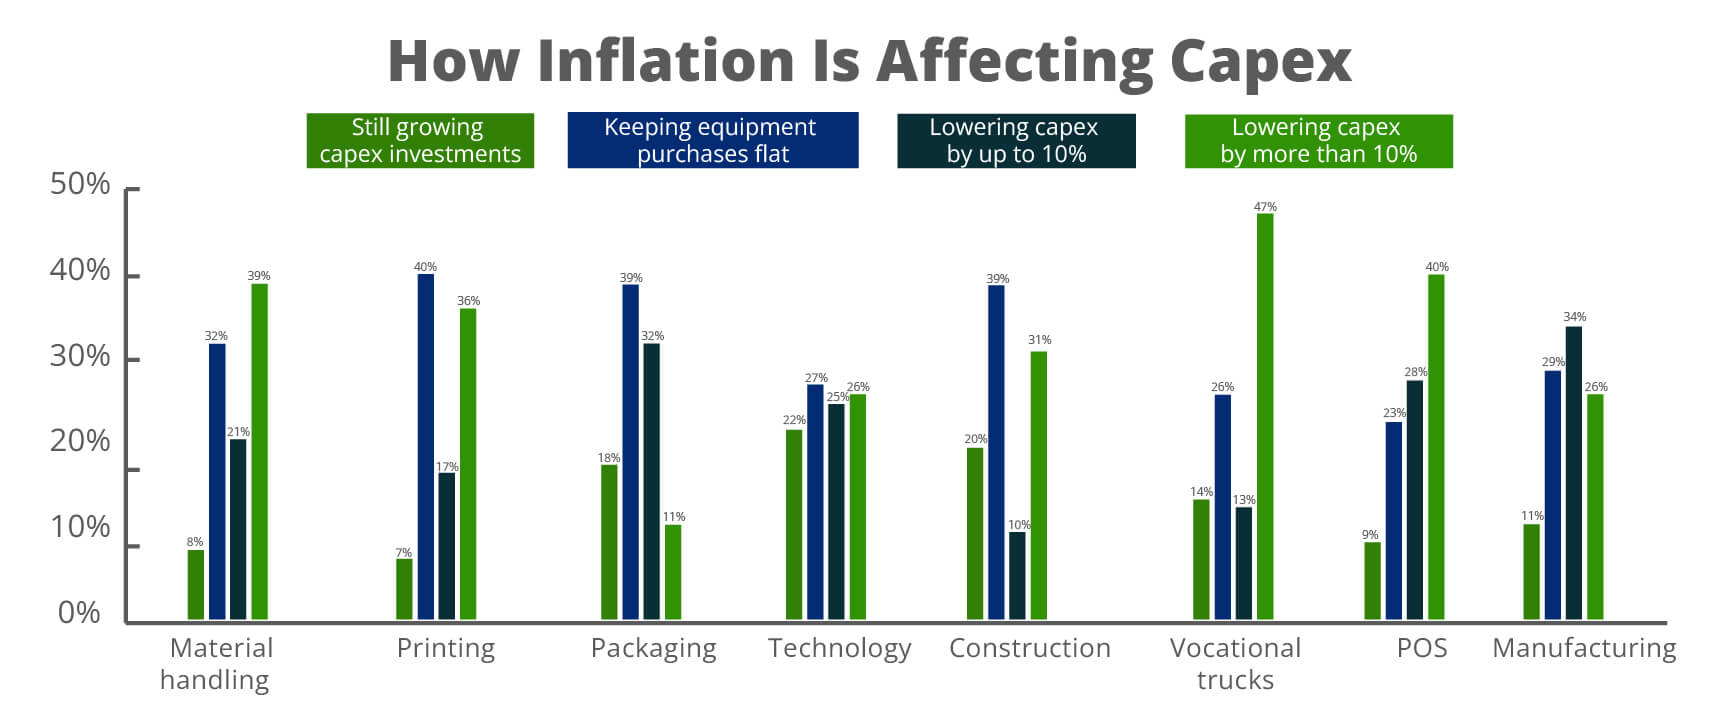 How Inflation Is Affecting Capex